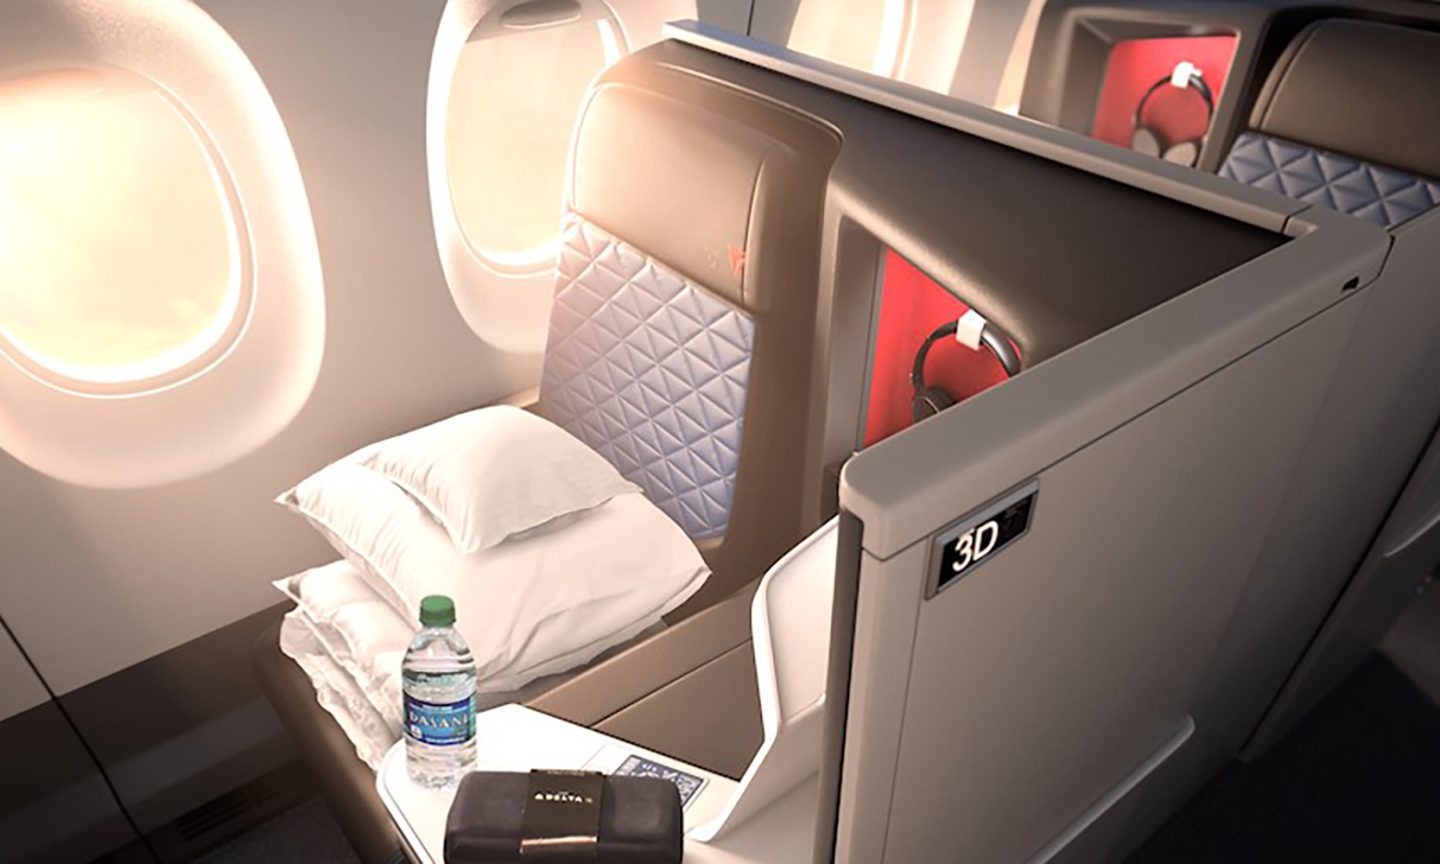 Delta Airlines First Class Domestic